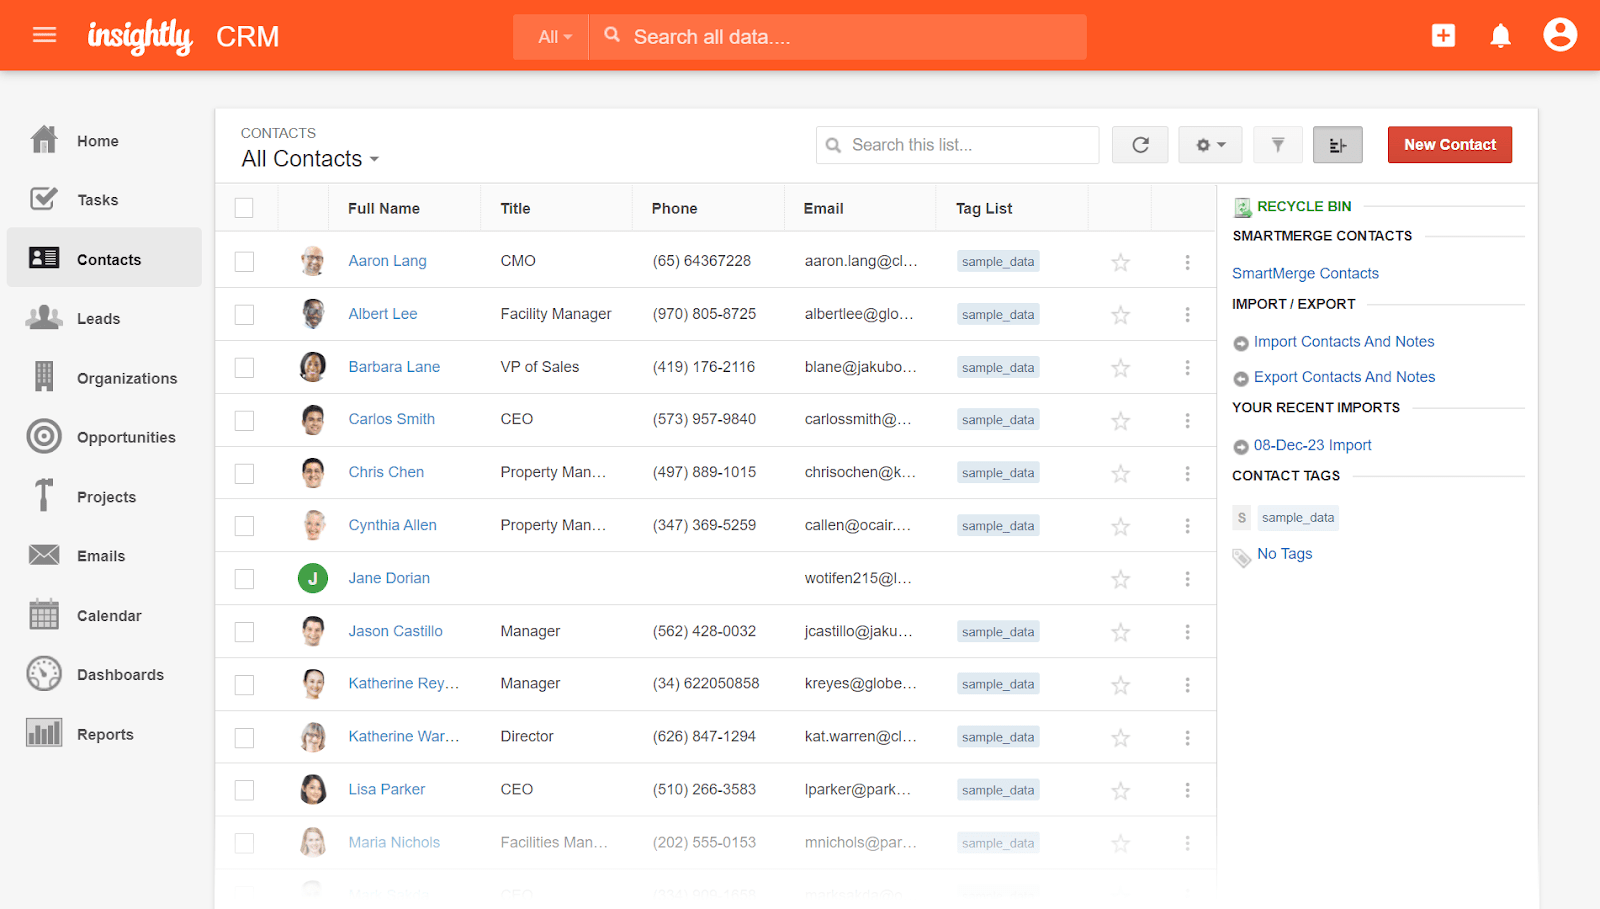 Insightly CRM contacts dashboard